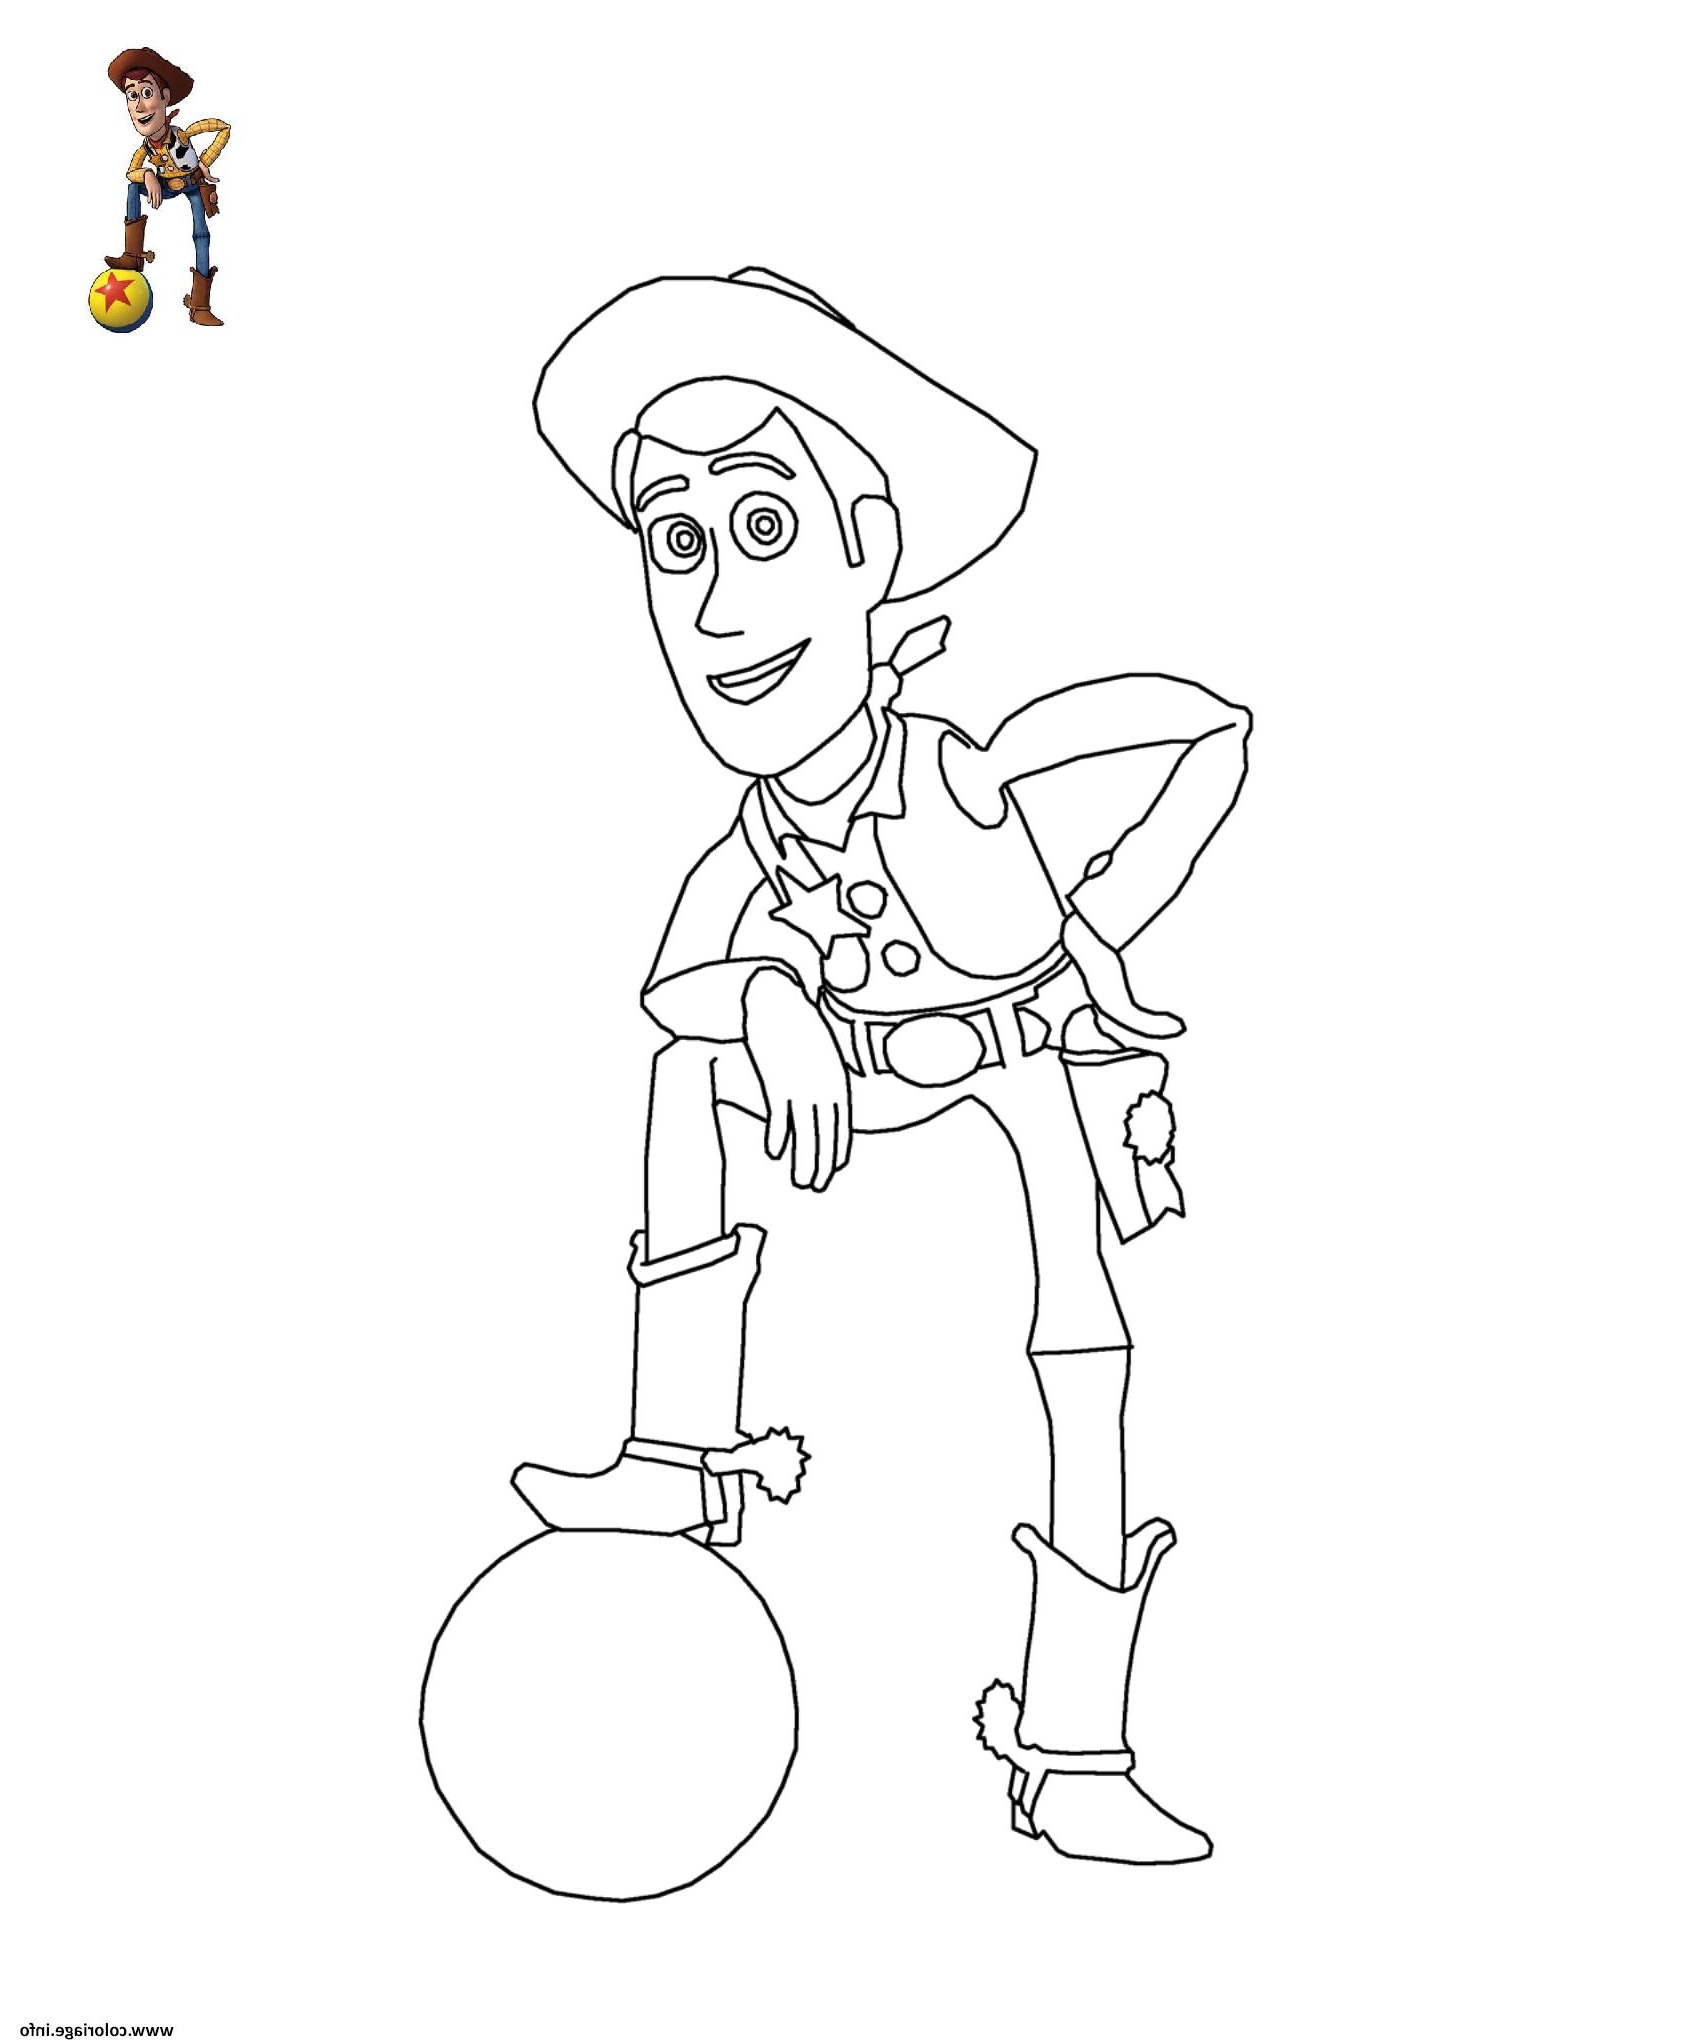 Toy Story Dessin Bestof Image Coloriage Sherif Woody toy Story Disney Dessin